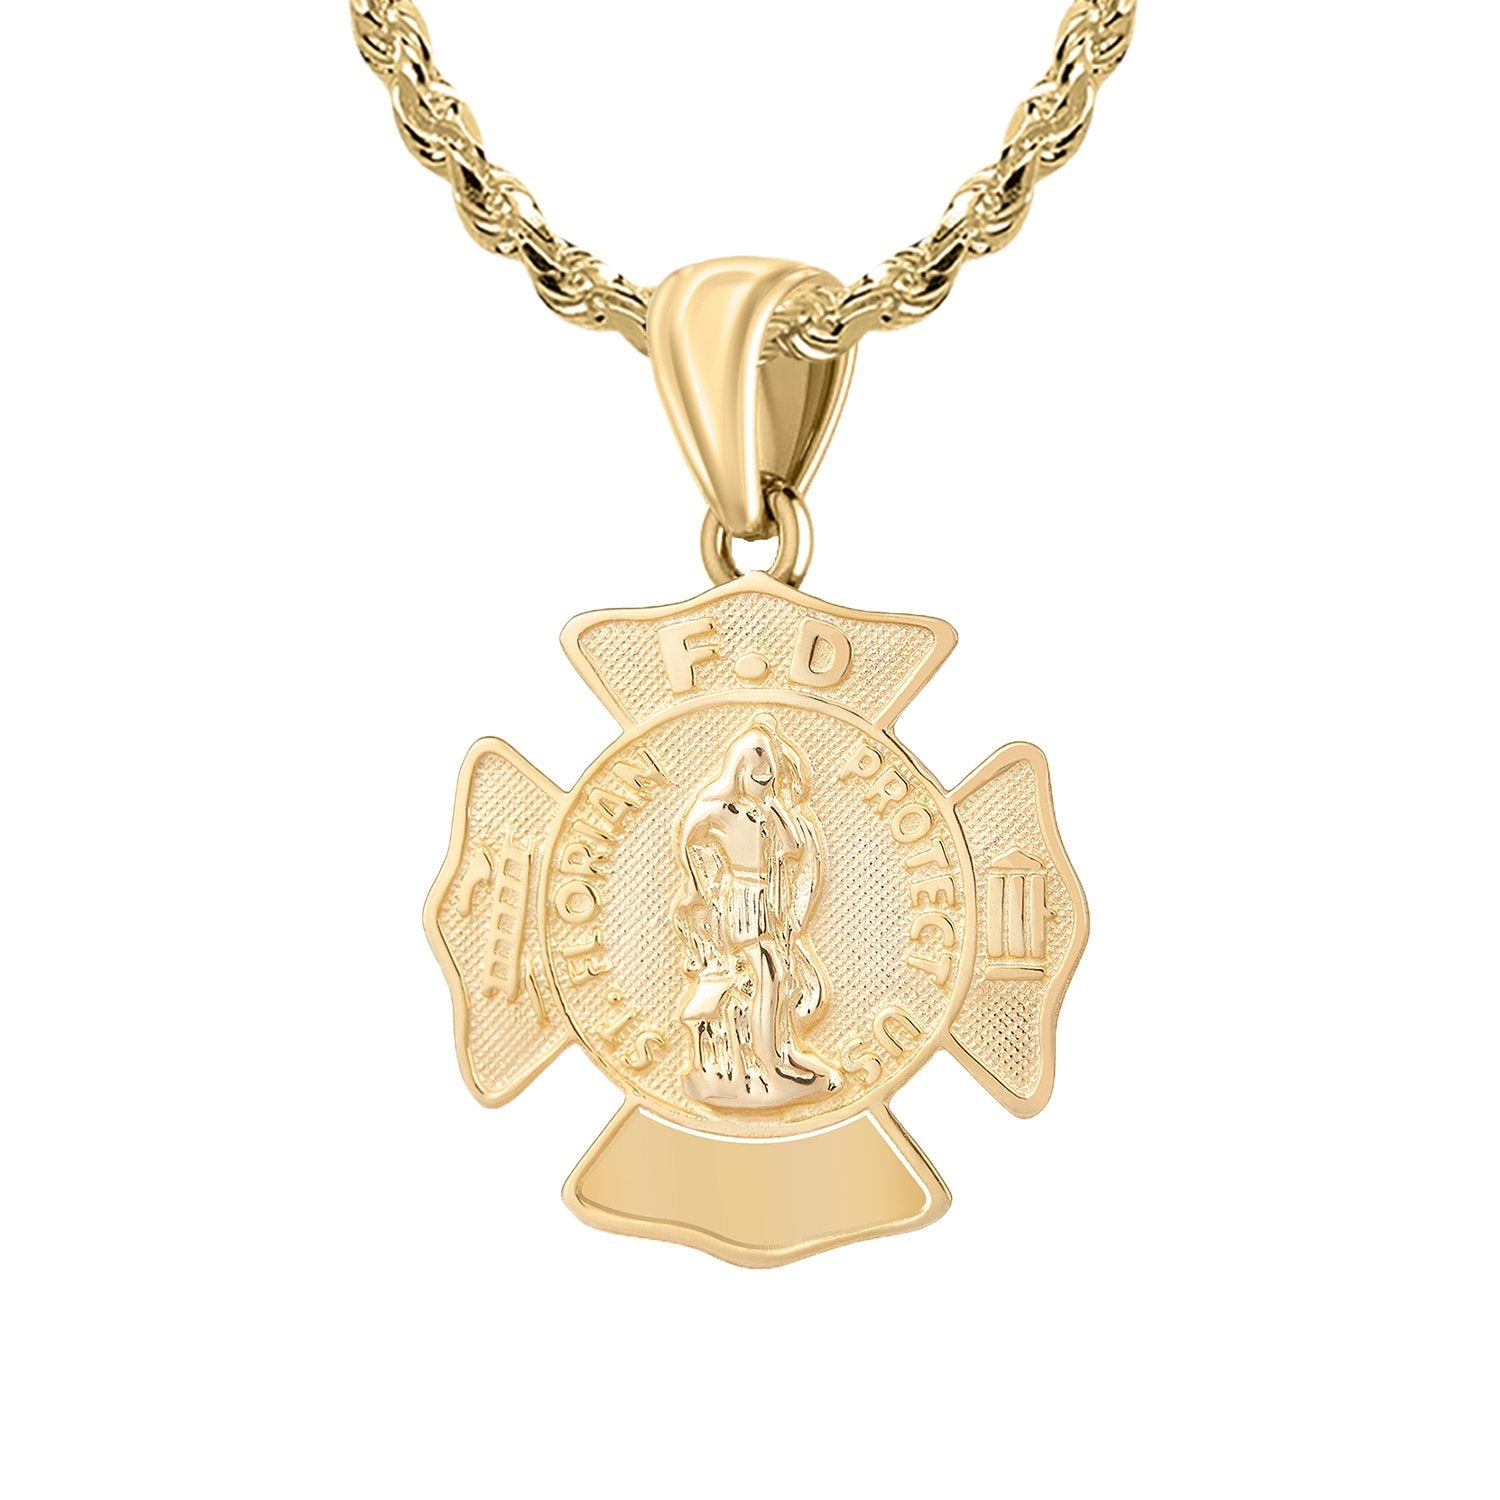 Firefighter Pendant In Gold With Chain - 2mm Rope Chain